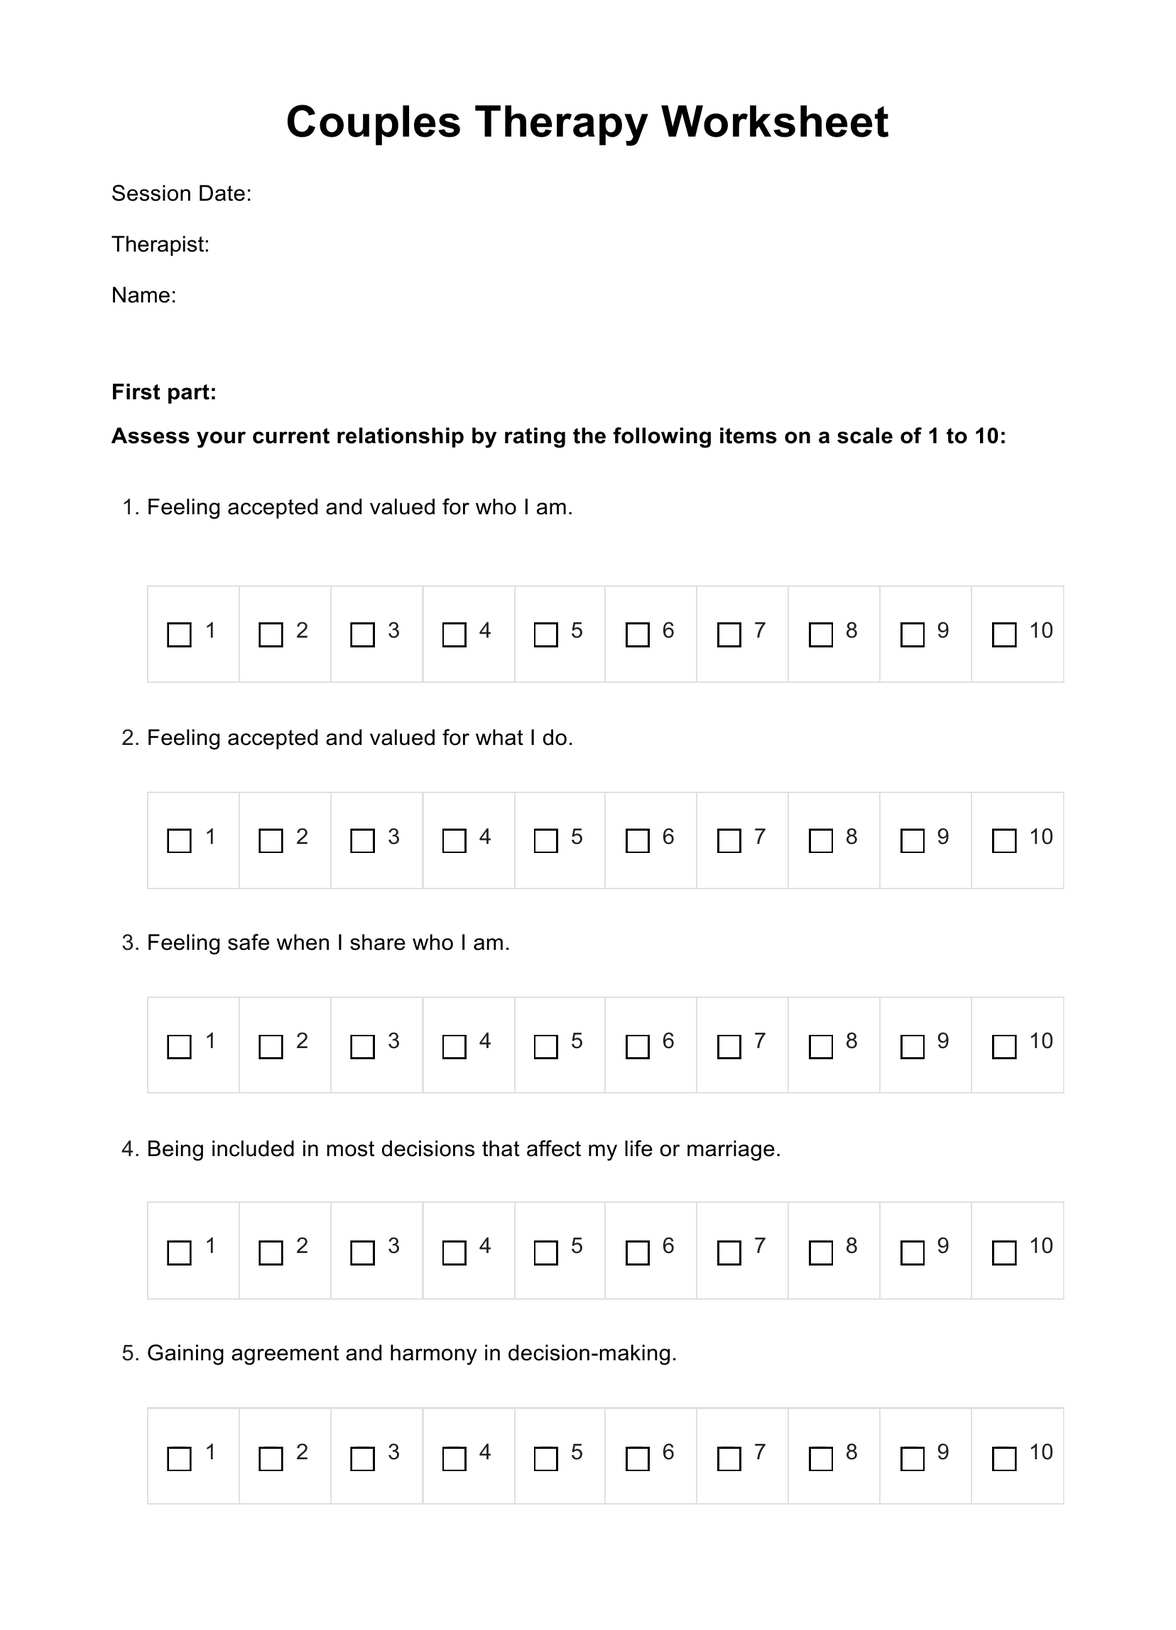 Couples Therapy Worksheets PDF Example